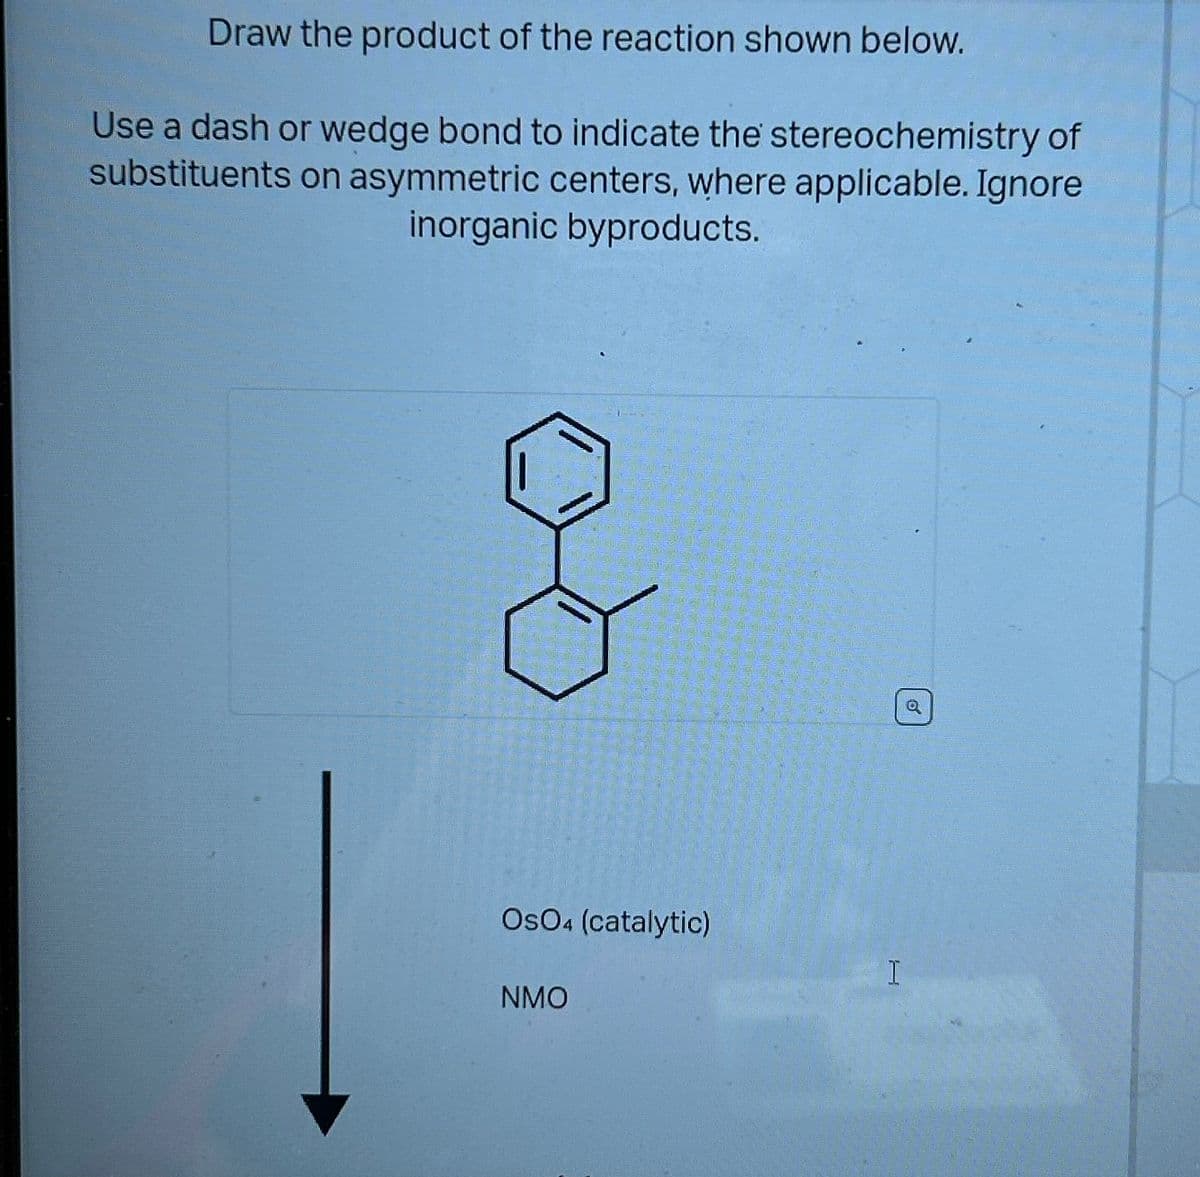 Draw the product of the reaction shown below.
Use a dash or wedge bond to indicate the stereochemistry of
substituents on asymmetric centers, where applicable. Ignore
inorganic byproducts.
OsO4 (catalytic)
NMO
H
o